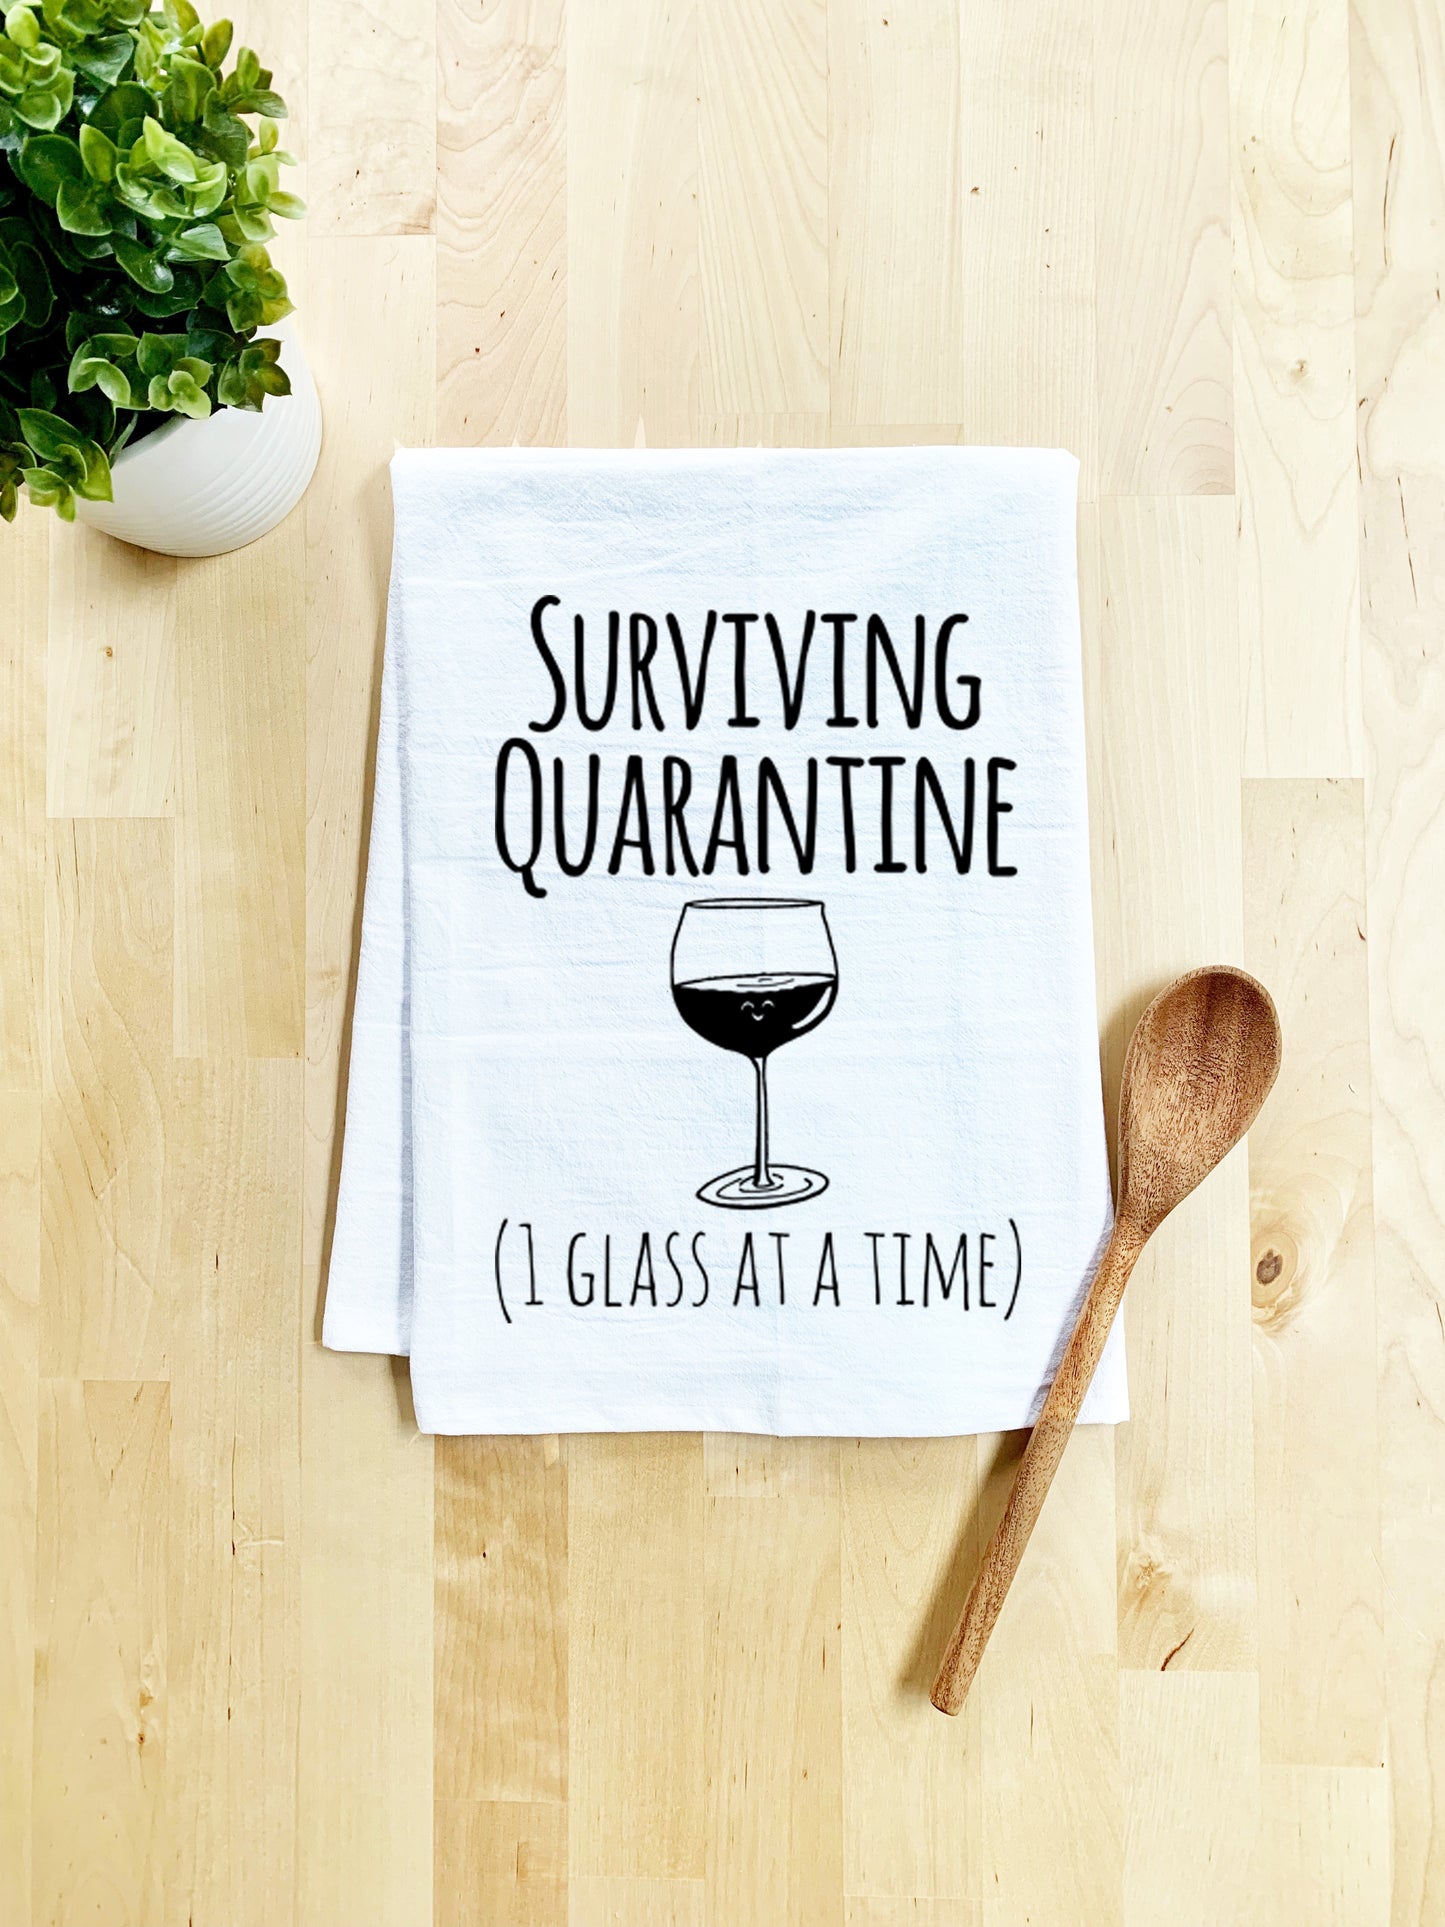 Surviving Quarantine (1 Glass At A Time), Dish Towel - White Or Gray - MoonlightMakers